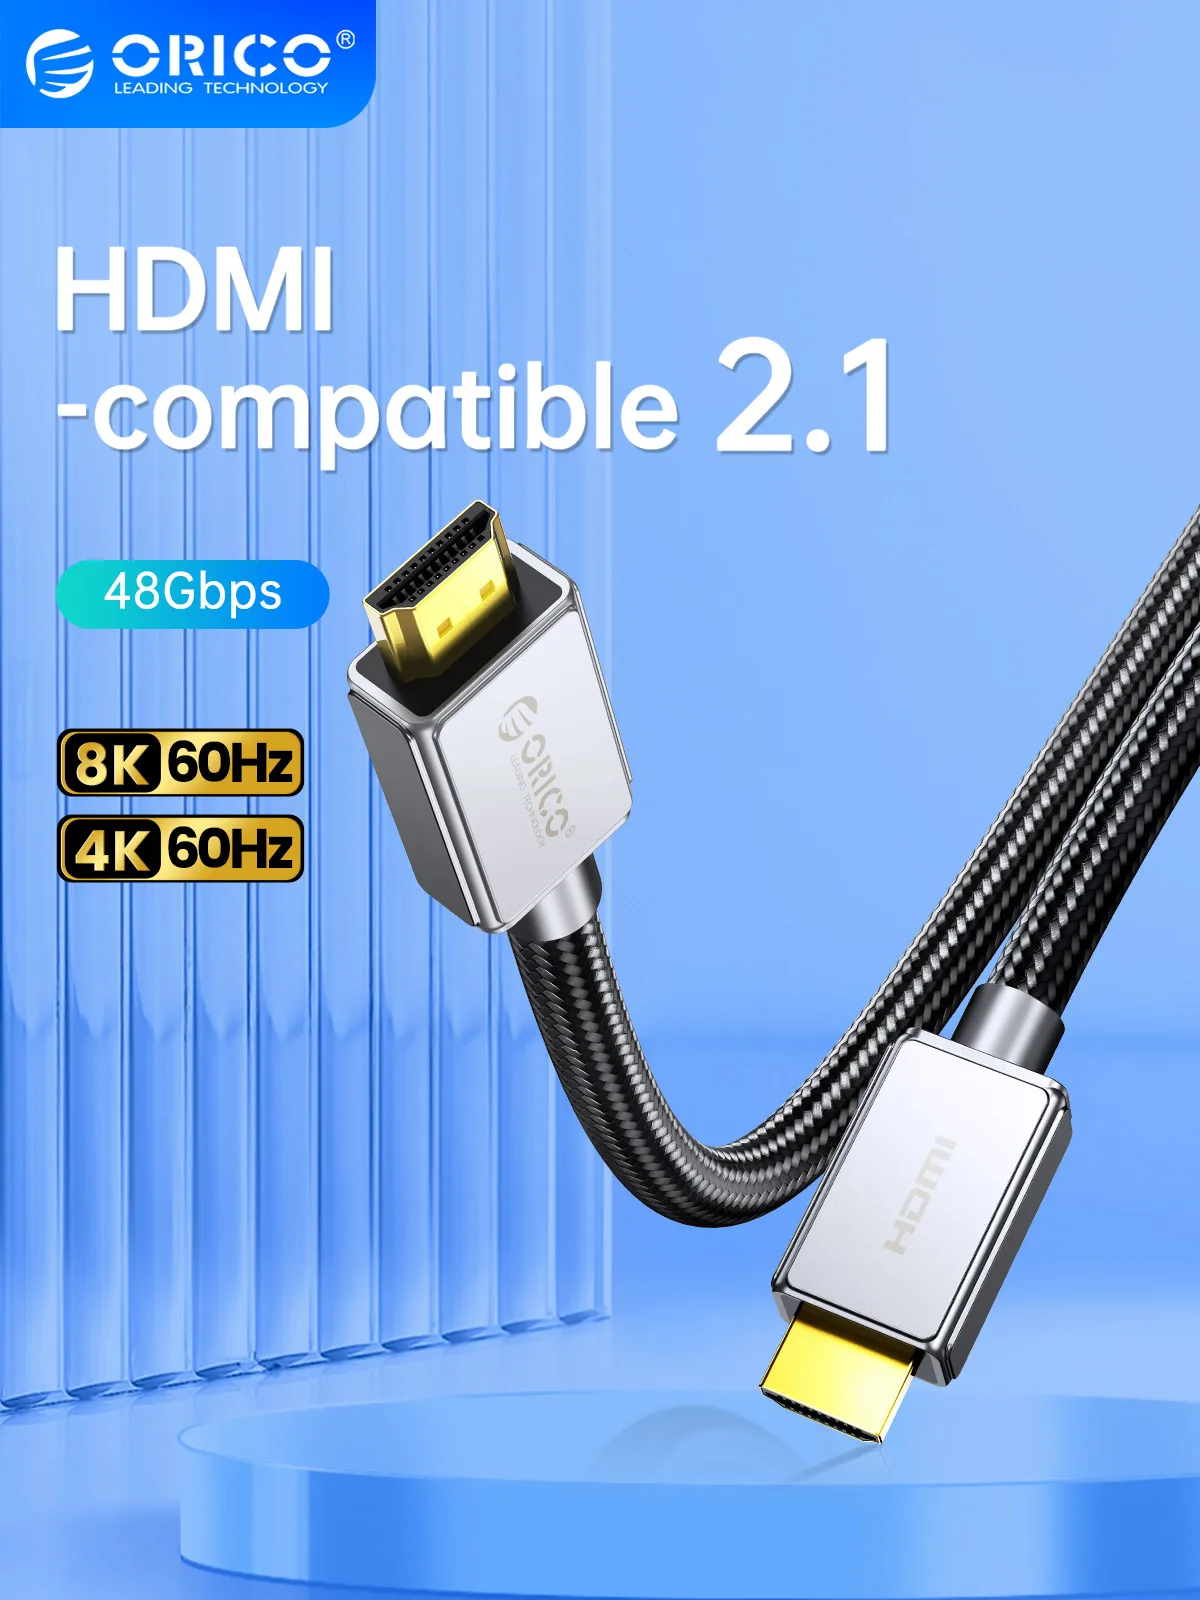 

ORICO 8K HDMI-compatible Cable 2.1 8K@60Hz 48Gbps Digital Cable Ultra High Speed for Xiaomi TV Box PS5 eARC Dolby Atmos HDR